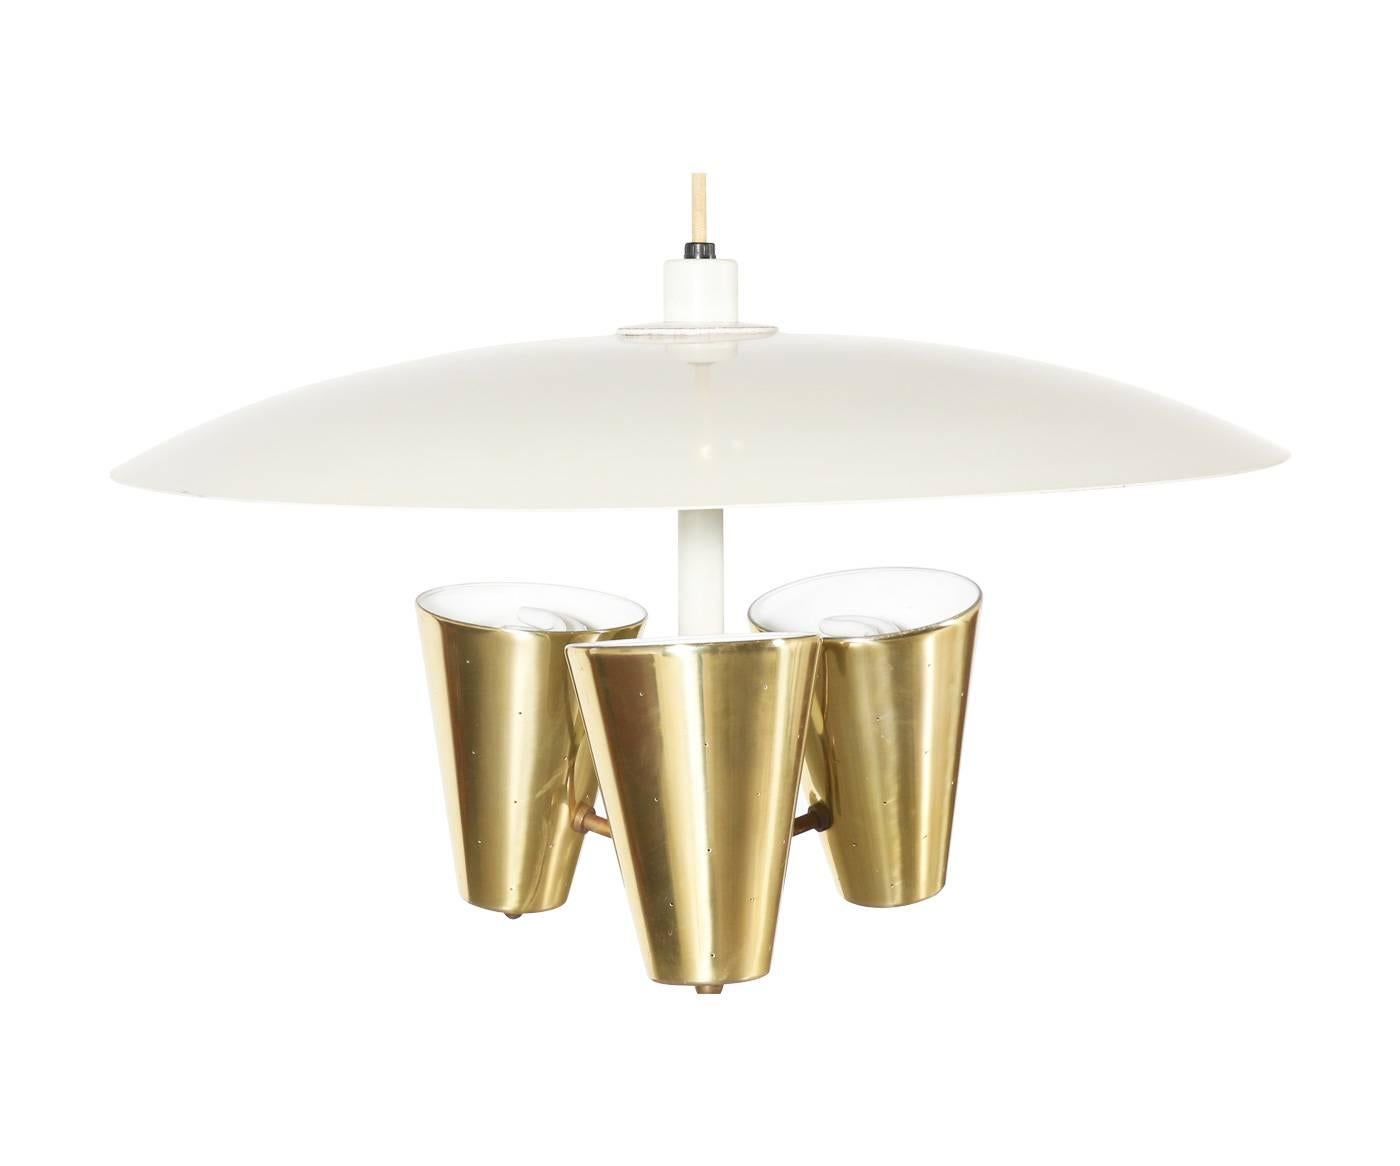 Designer: Edward J. Wormley.
Manufacturer: Lightolier.
Period/Style: Mid-Century Modern.
Country: United States.
Date: 1950s.

Dimensions: 15″ H x 25″ W.
Materials: Enameled aluminum, brass
Condition: Shows minor wear consistent with age and